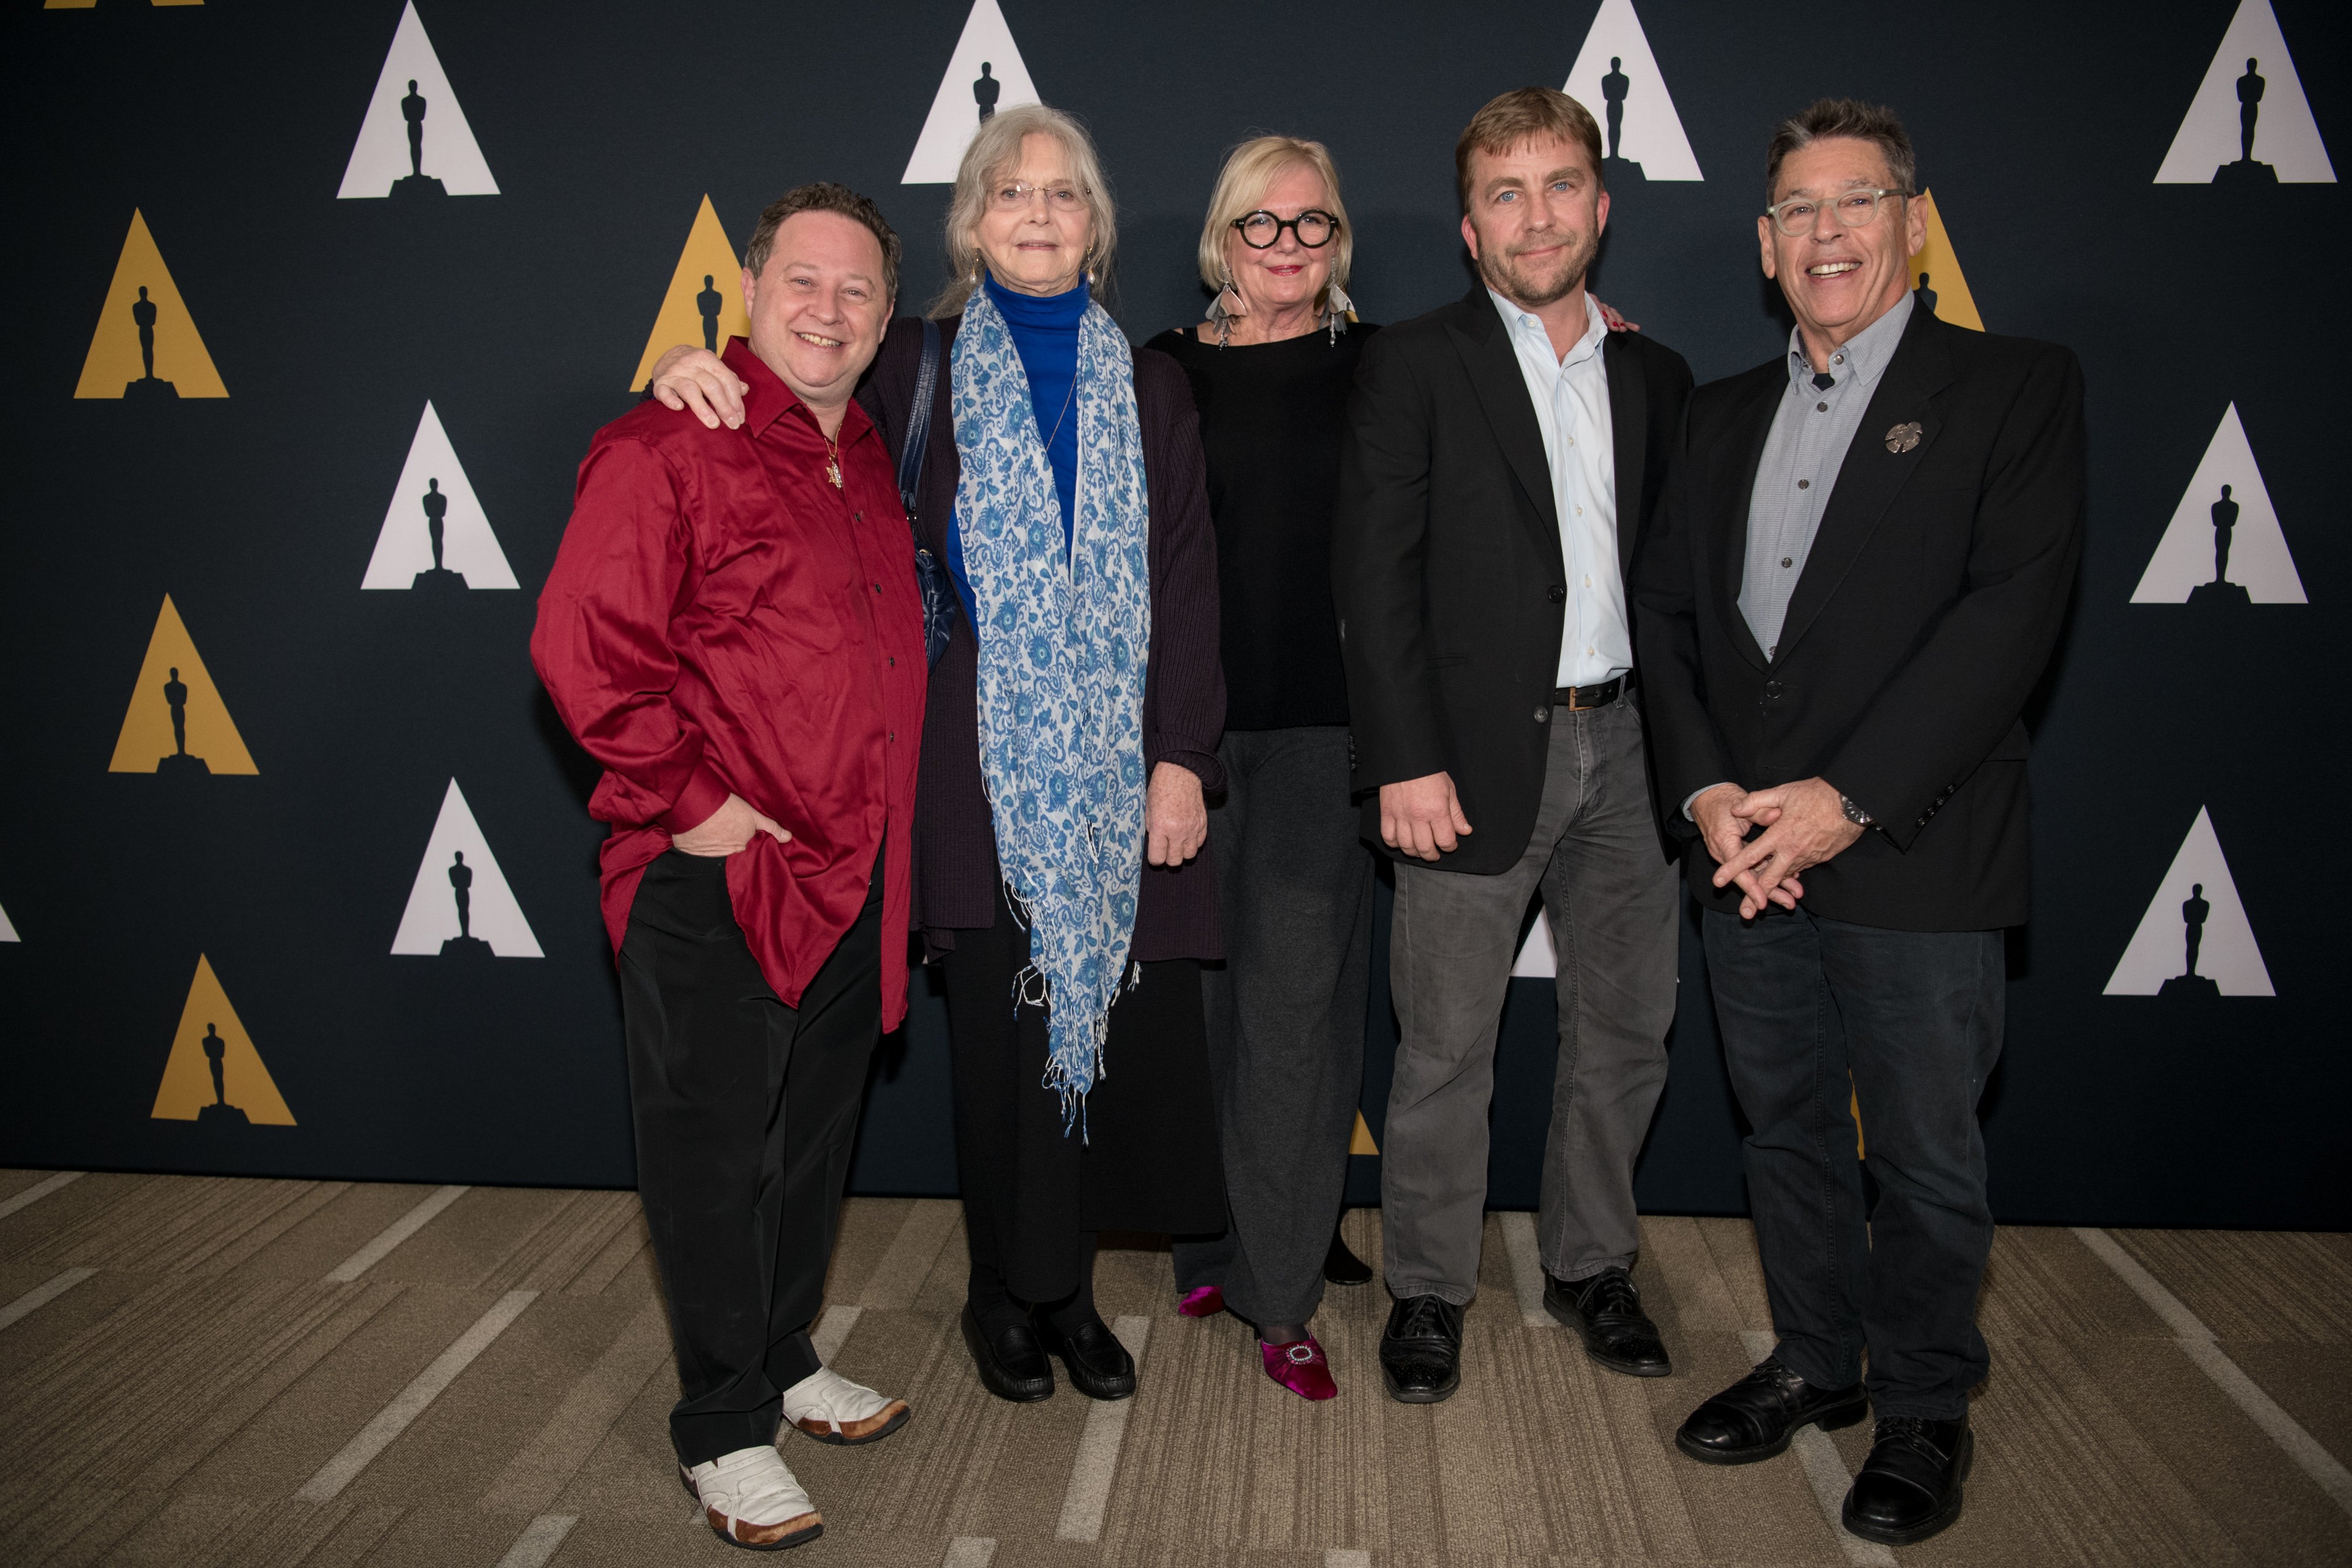 Scott Schwartz, Melinda Dillon, Mary E. McLeod, Peter Billingsley, and Reuben Freed arrive at the Academy Of Motion Picture Arts And Sciences 35th Anniversary Screening Of "A Christmas Story" at Samuel Goldwyn Theater on December 10, 2018 in Beverly Hills, California | Source: Getty Images 